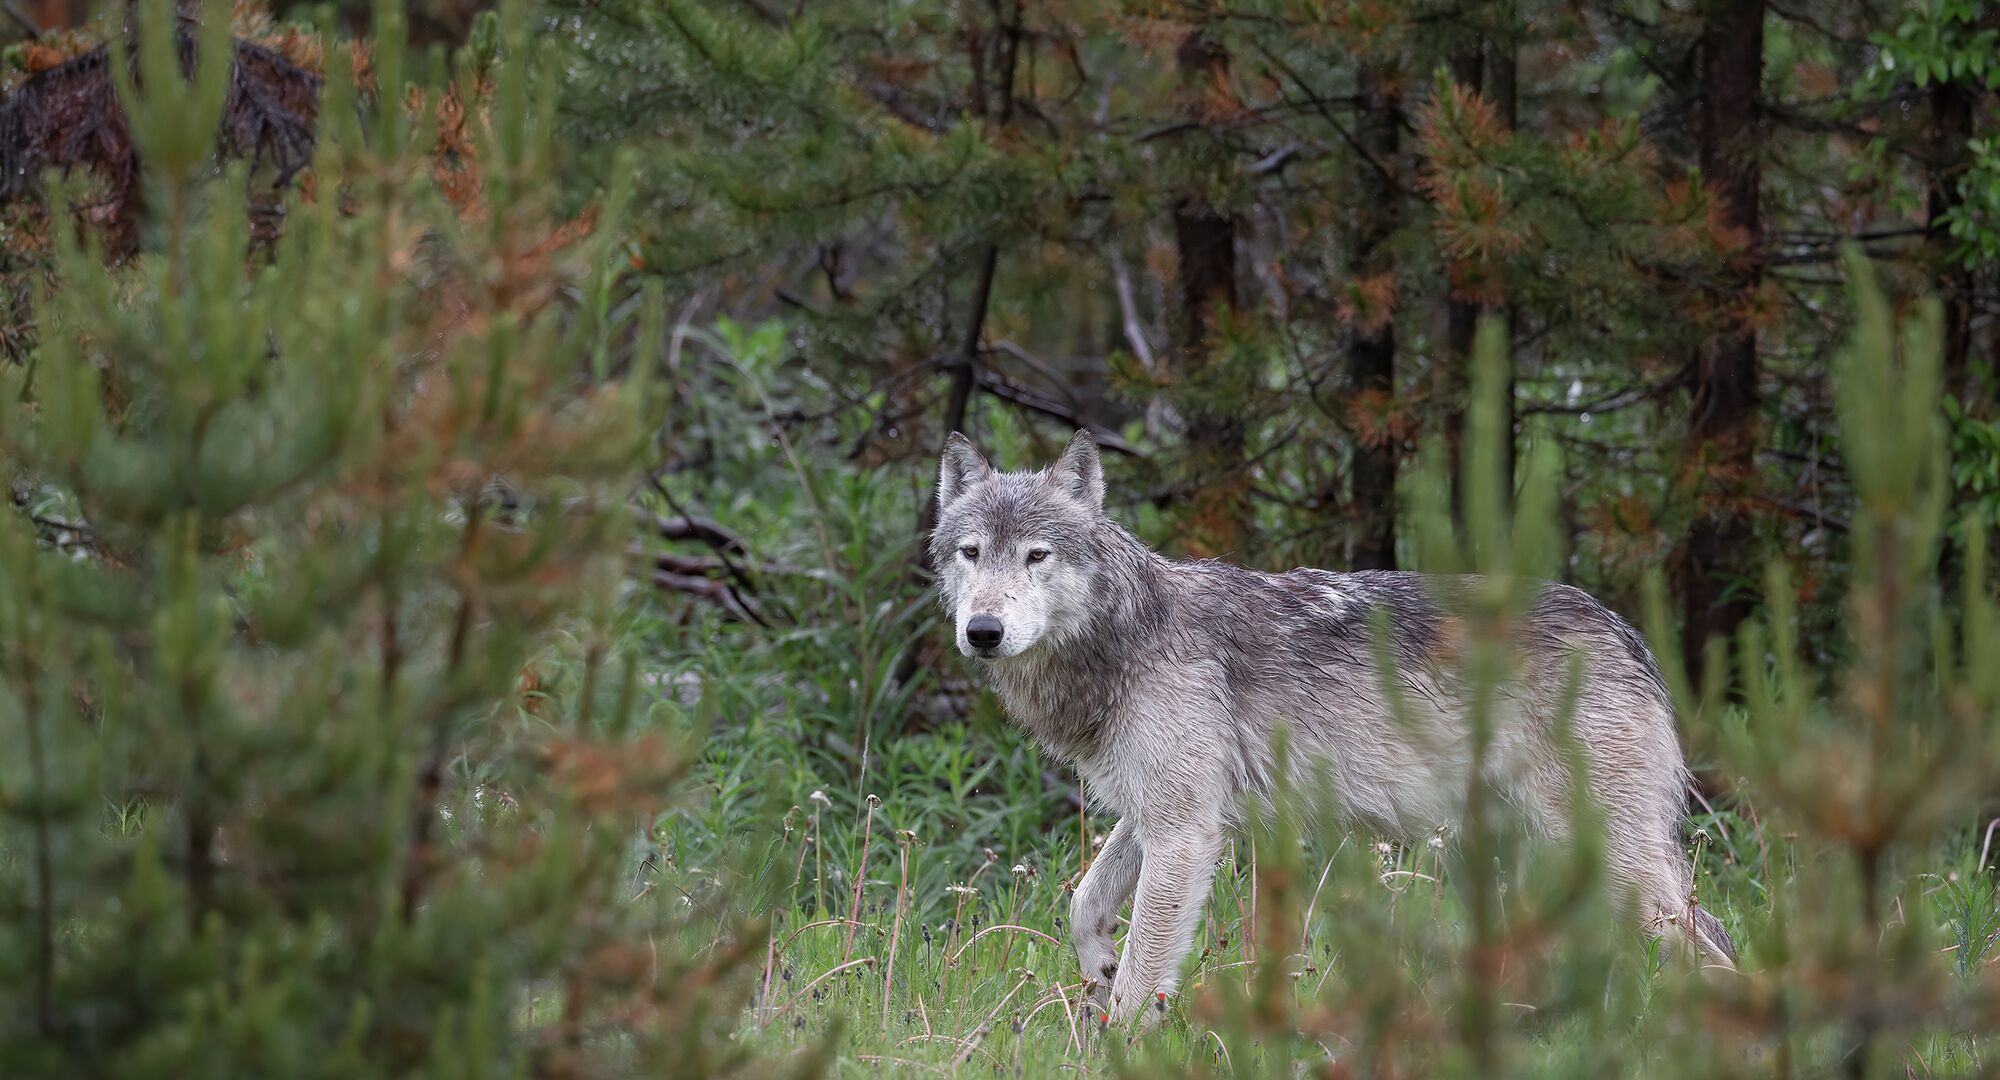 A wolf walks through the forest and looks at the camera in Banff National Park.